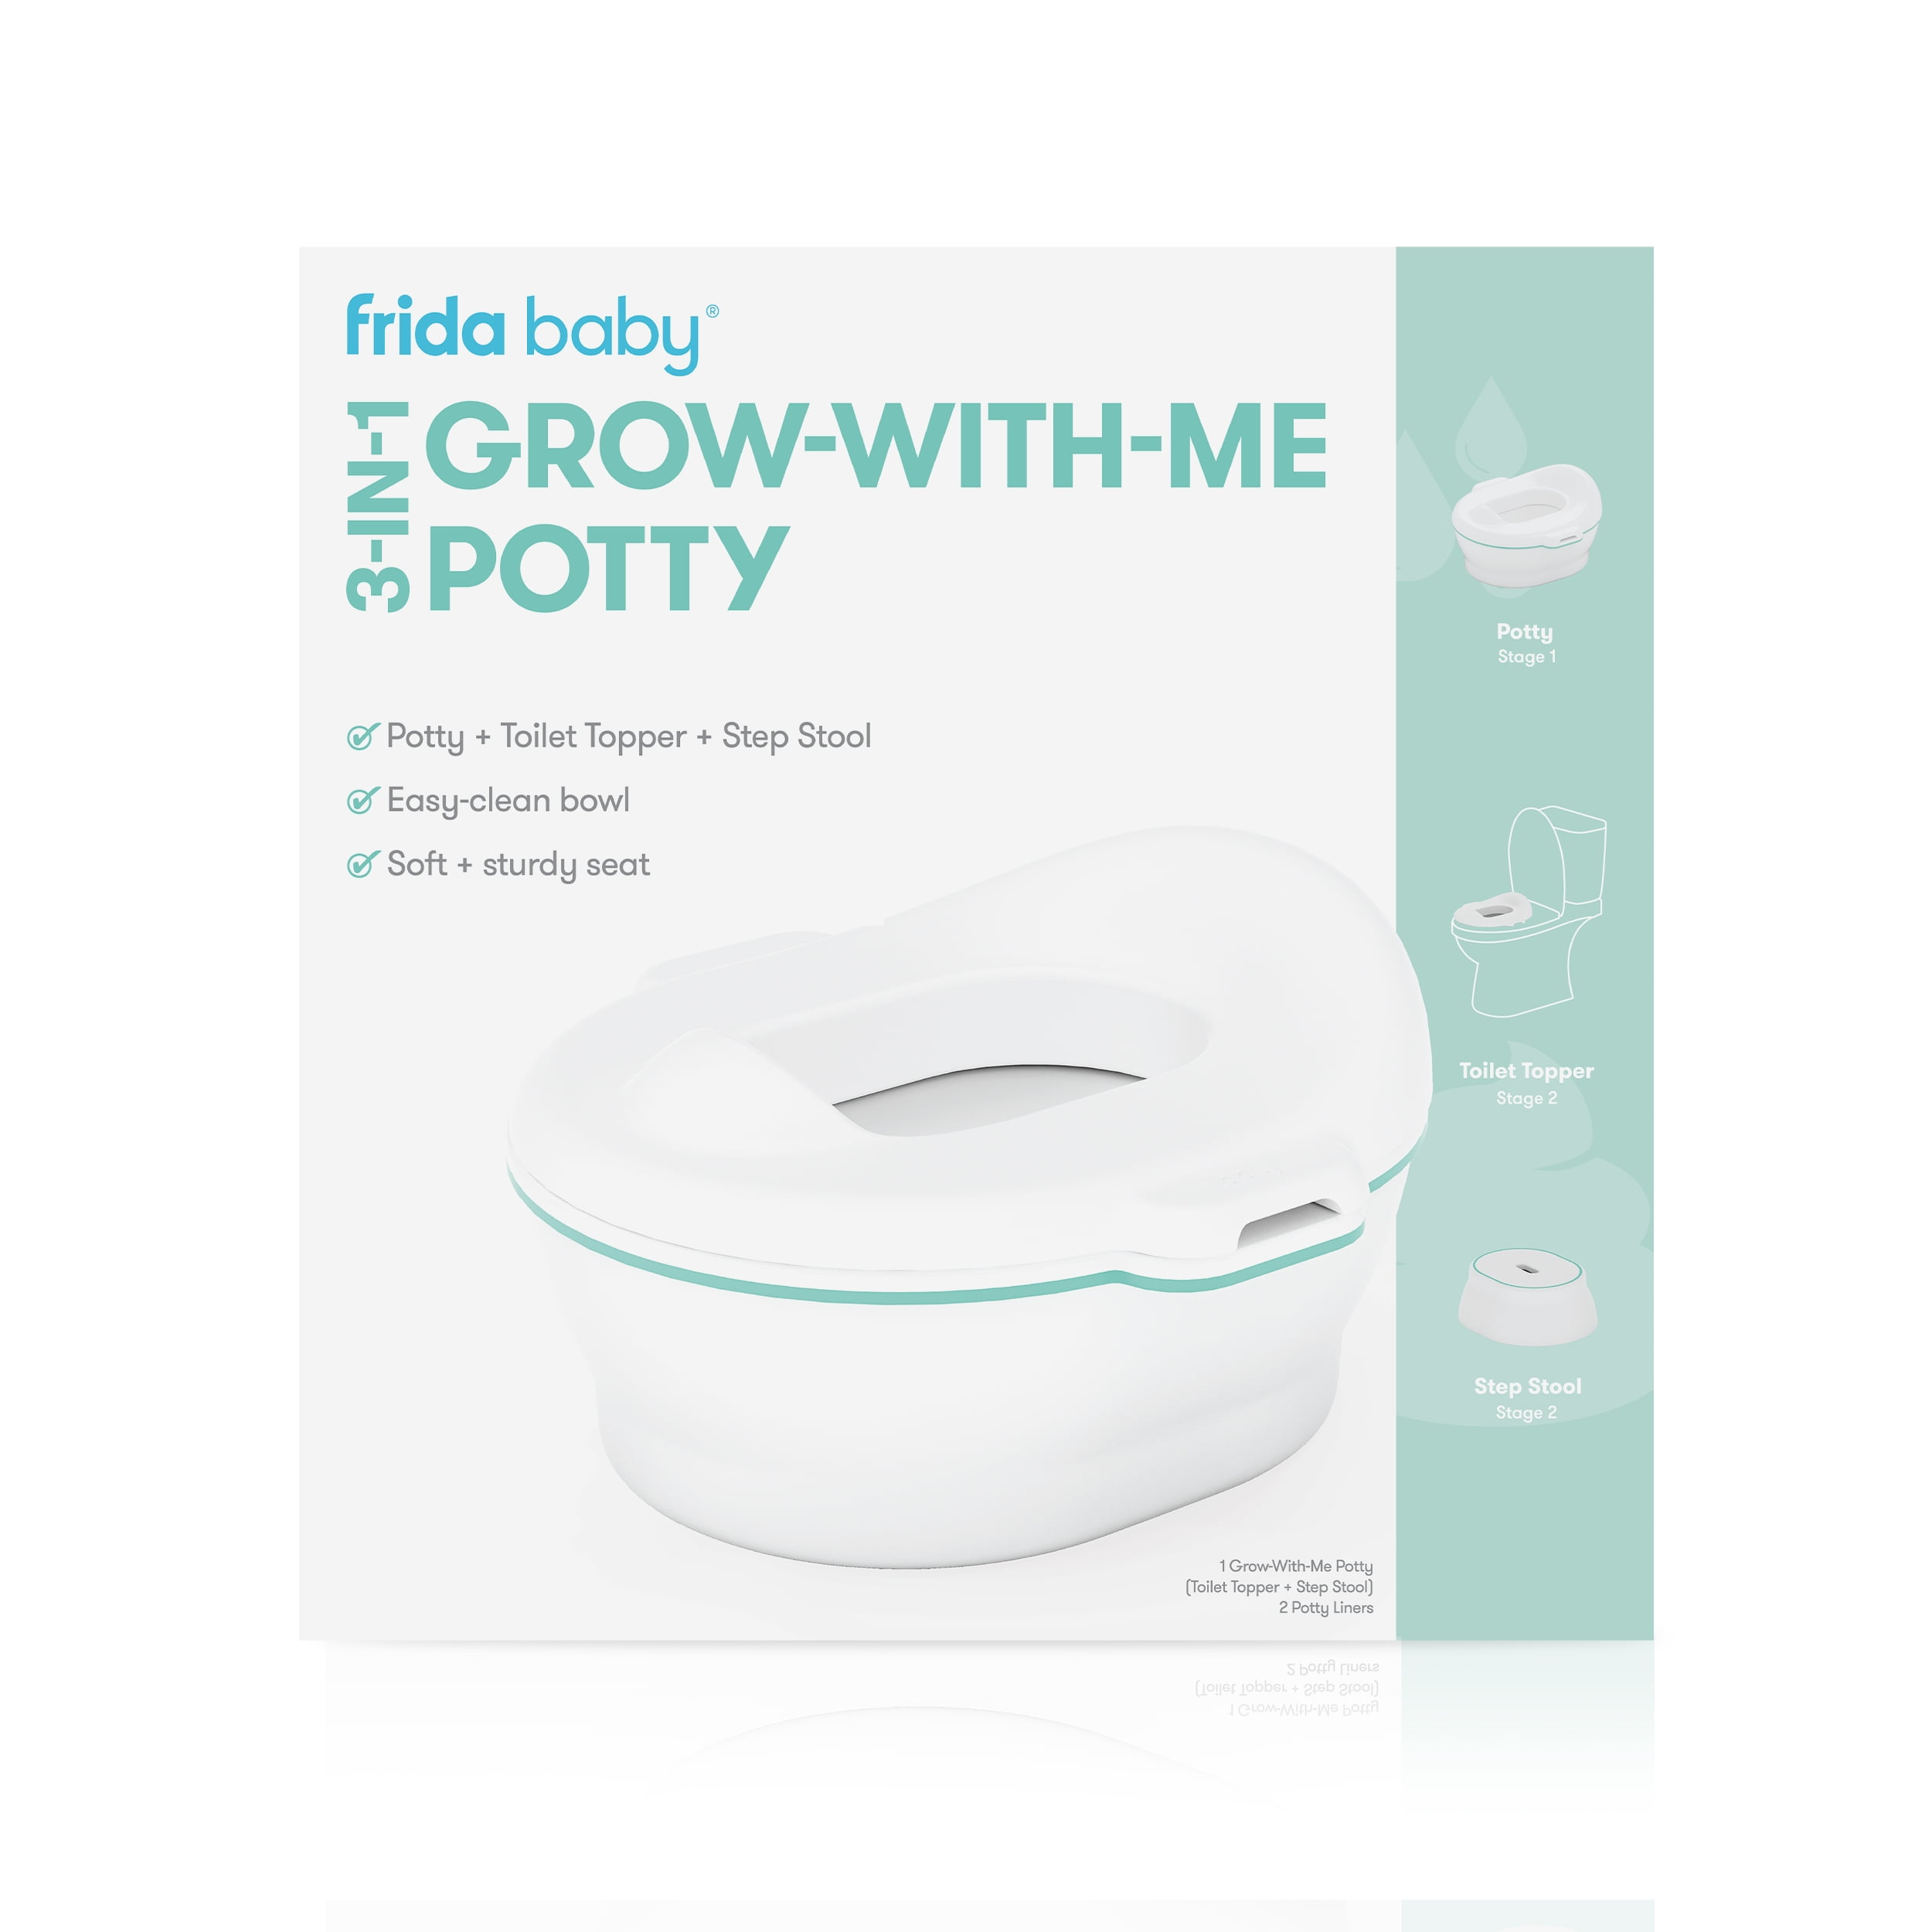 Frida Baby 3-in-1 Grow-With-Me Potty Transforms from Potty to Toilet Topper and Step Stool | Easy-to-Clean Potty Training System